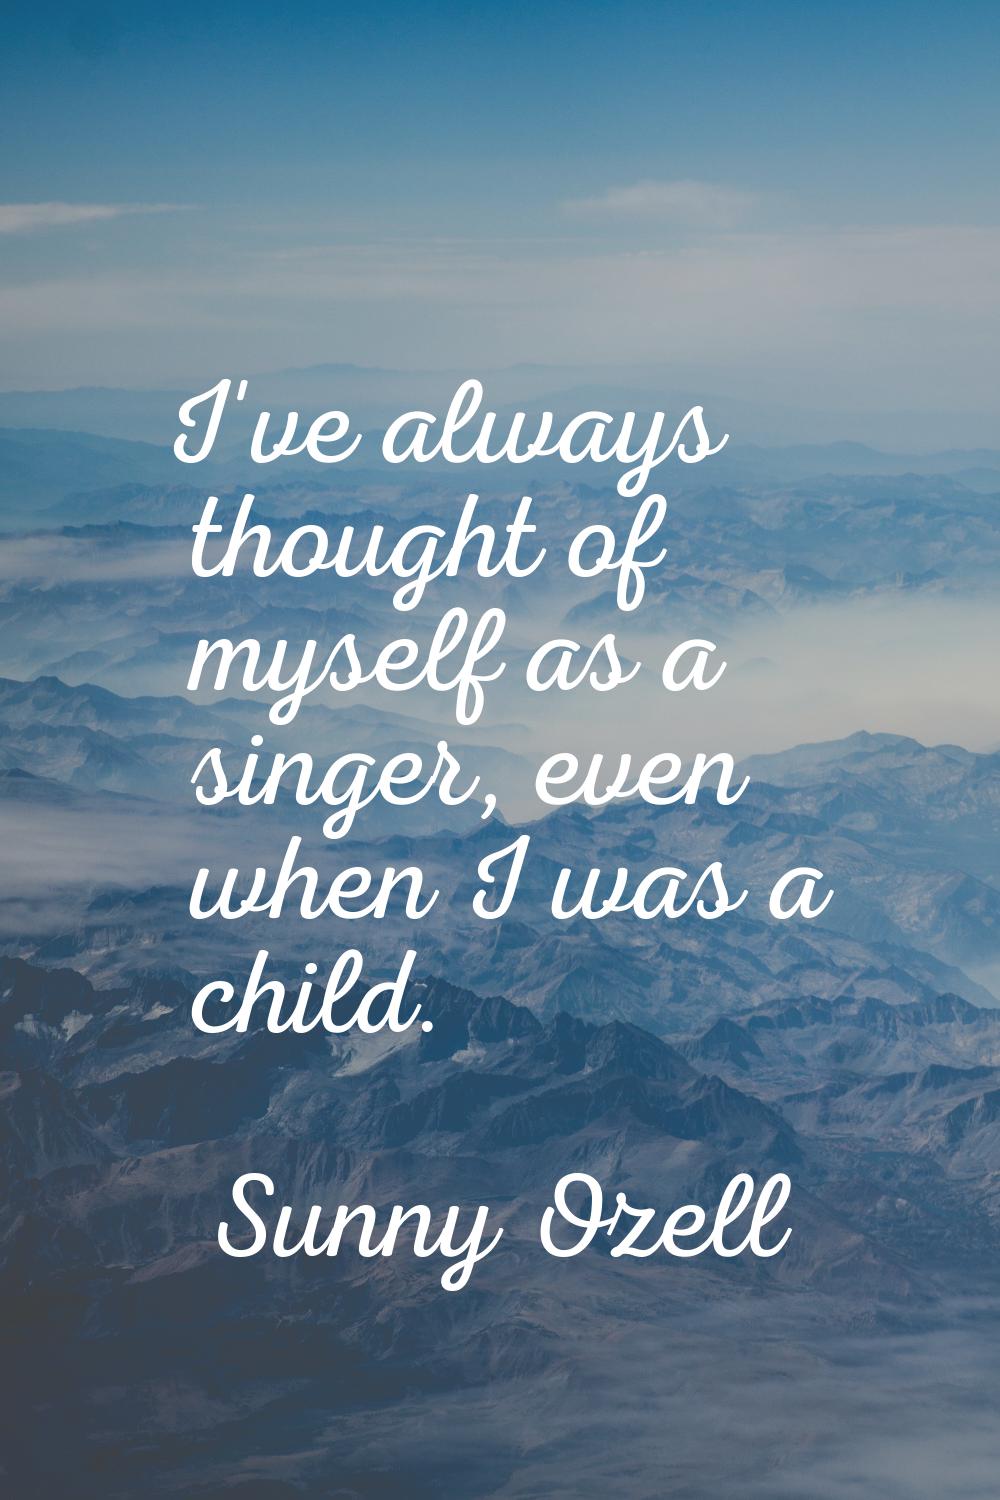 I've always thought of myself as a singer, even when I was a child.